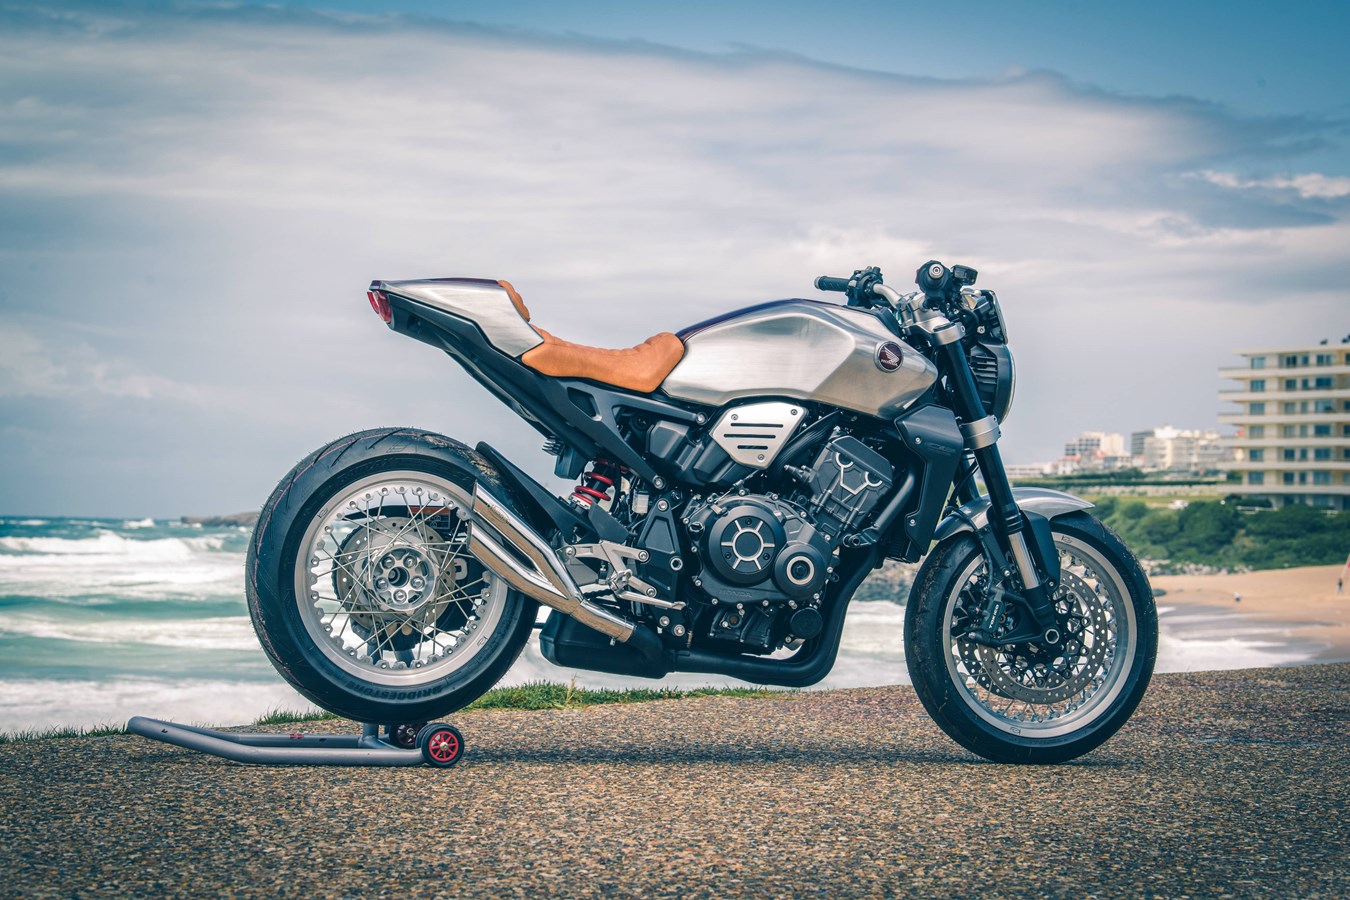 A DOZEN CUSTOMIZED CB1000R'S AT WHEELS AND WAVES 2019 ...